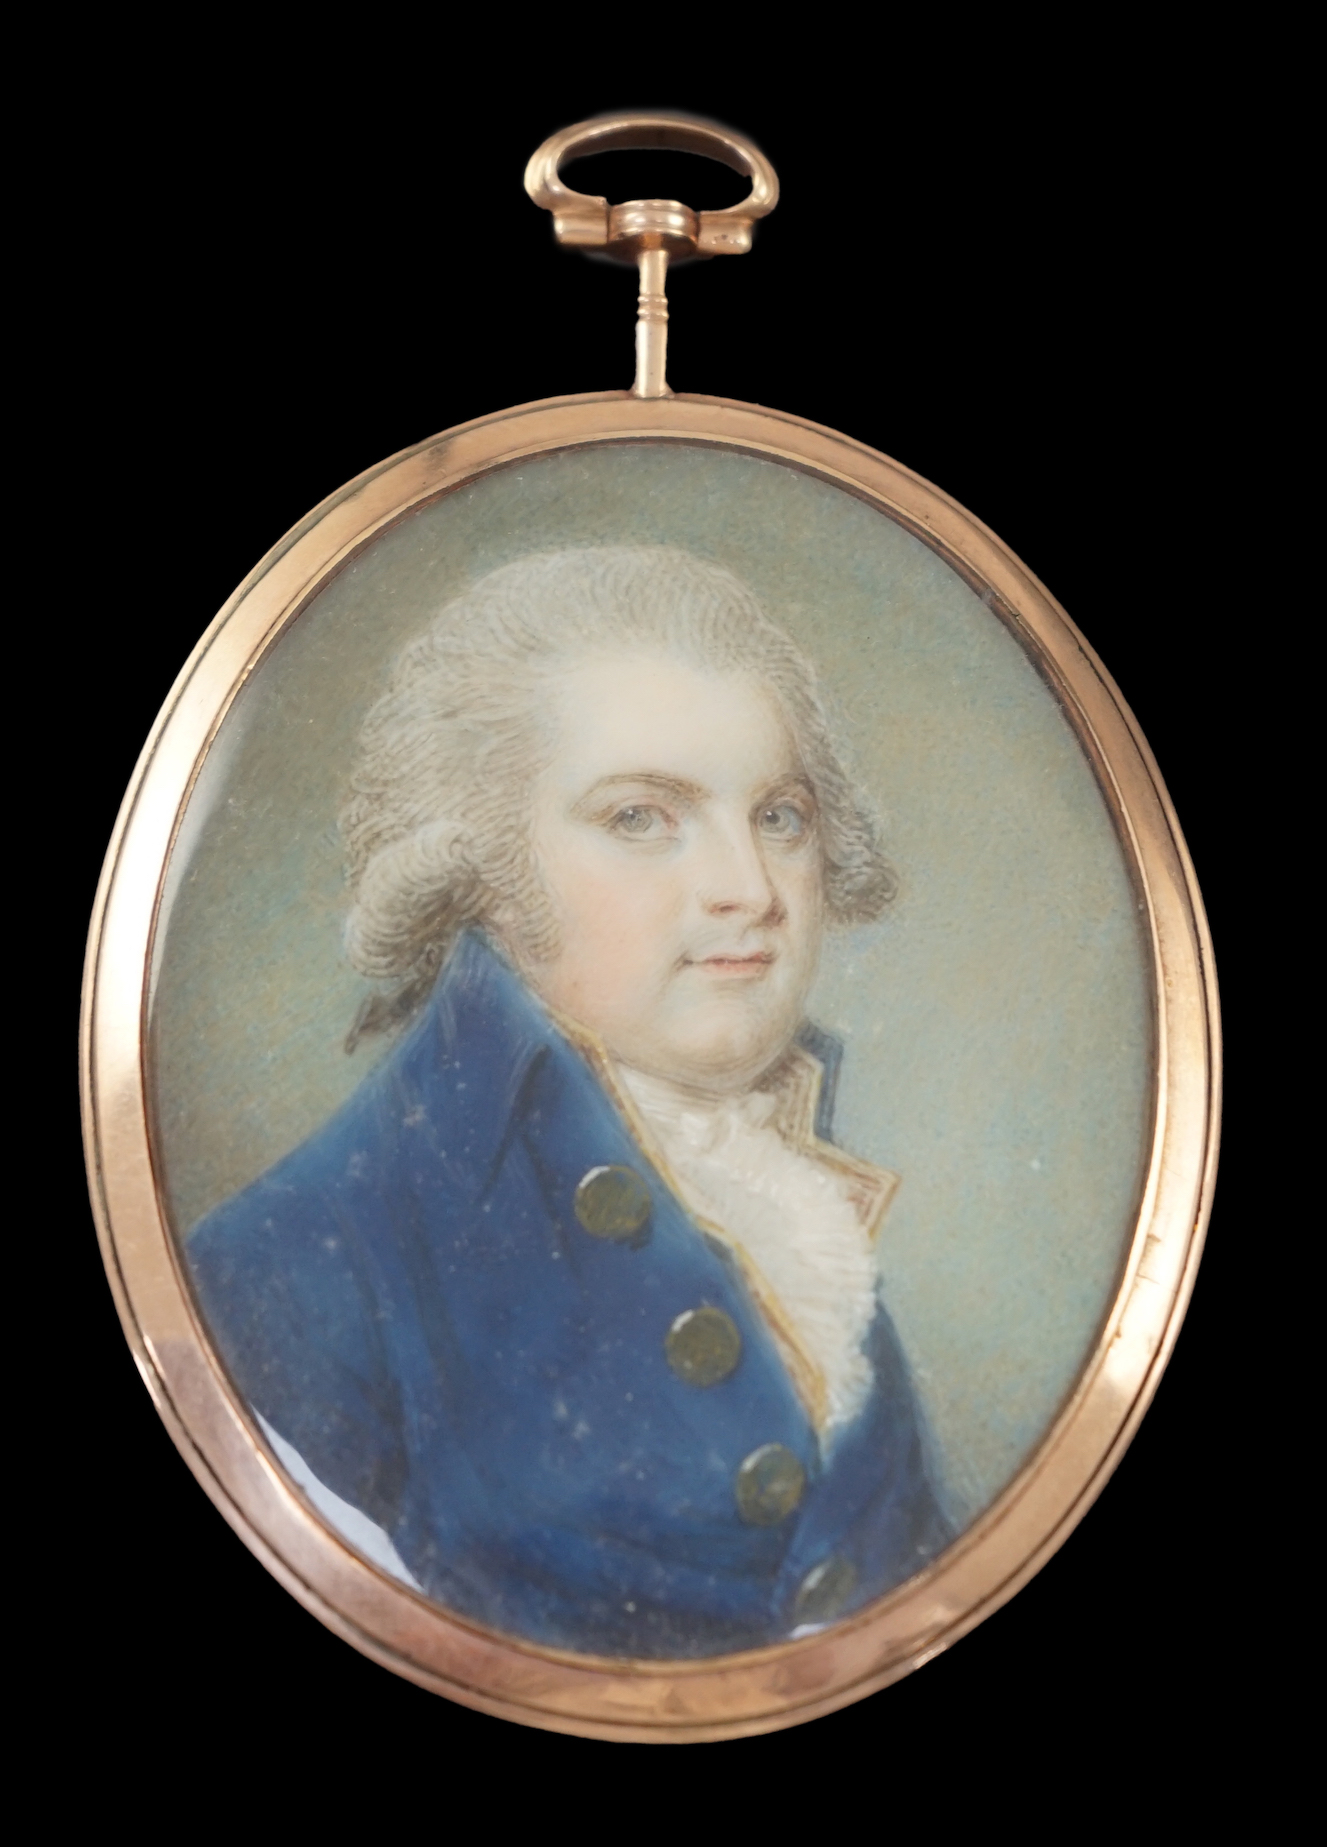 English School circa 1800-1810, Portrait miniature of a gentleman wearing a blue coat, watercolour on ivory, 5.7 x 4.6cm. CITES Submission reference T2D5BH3S